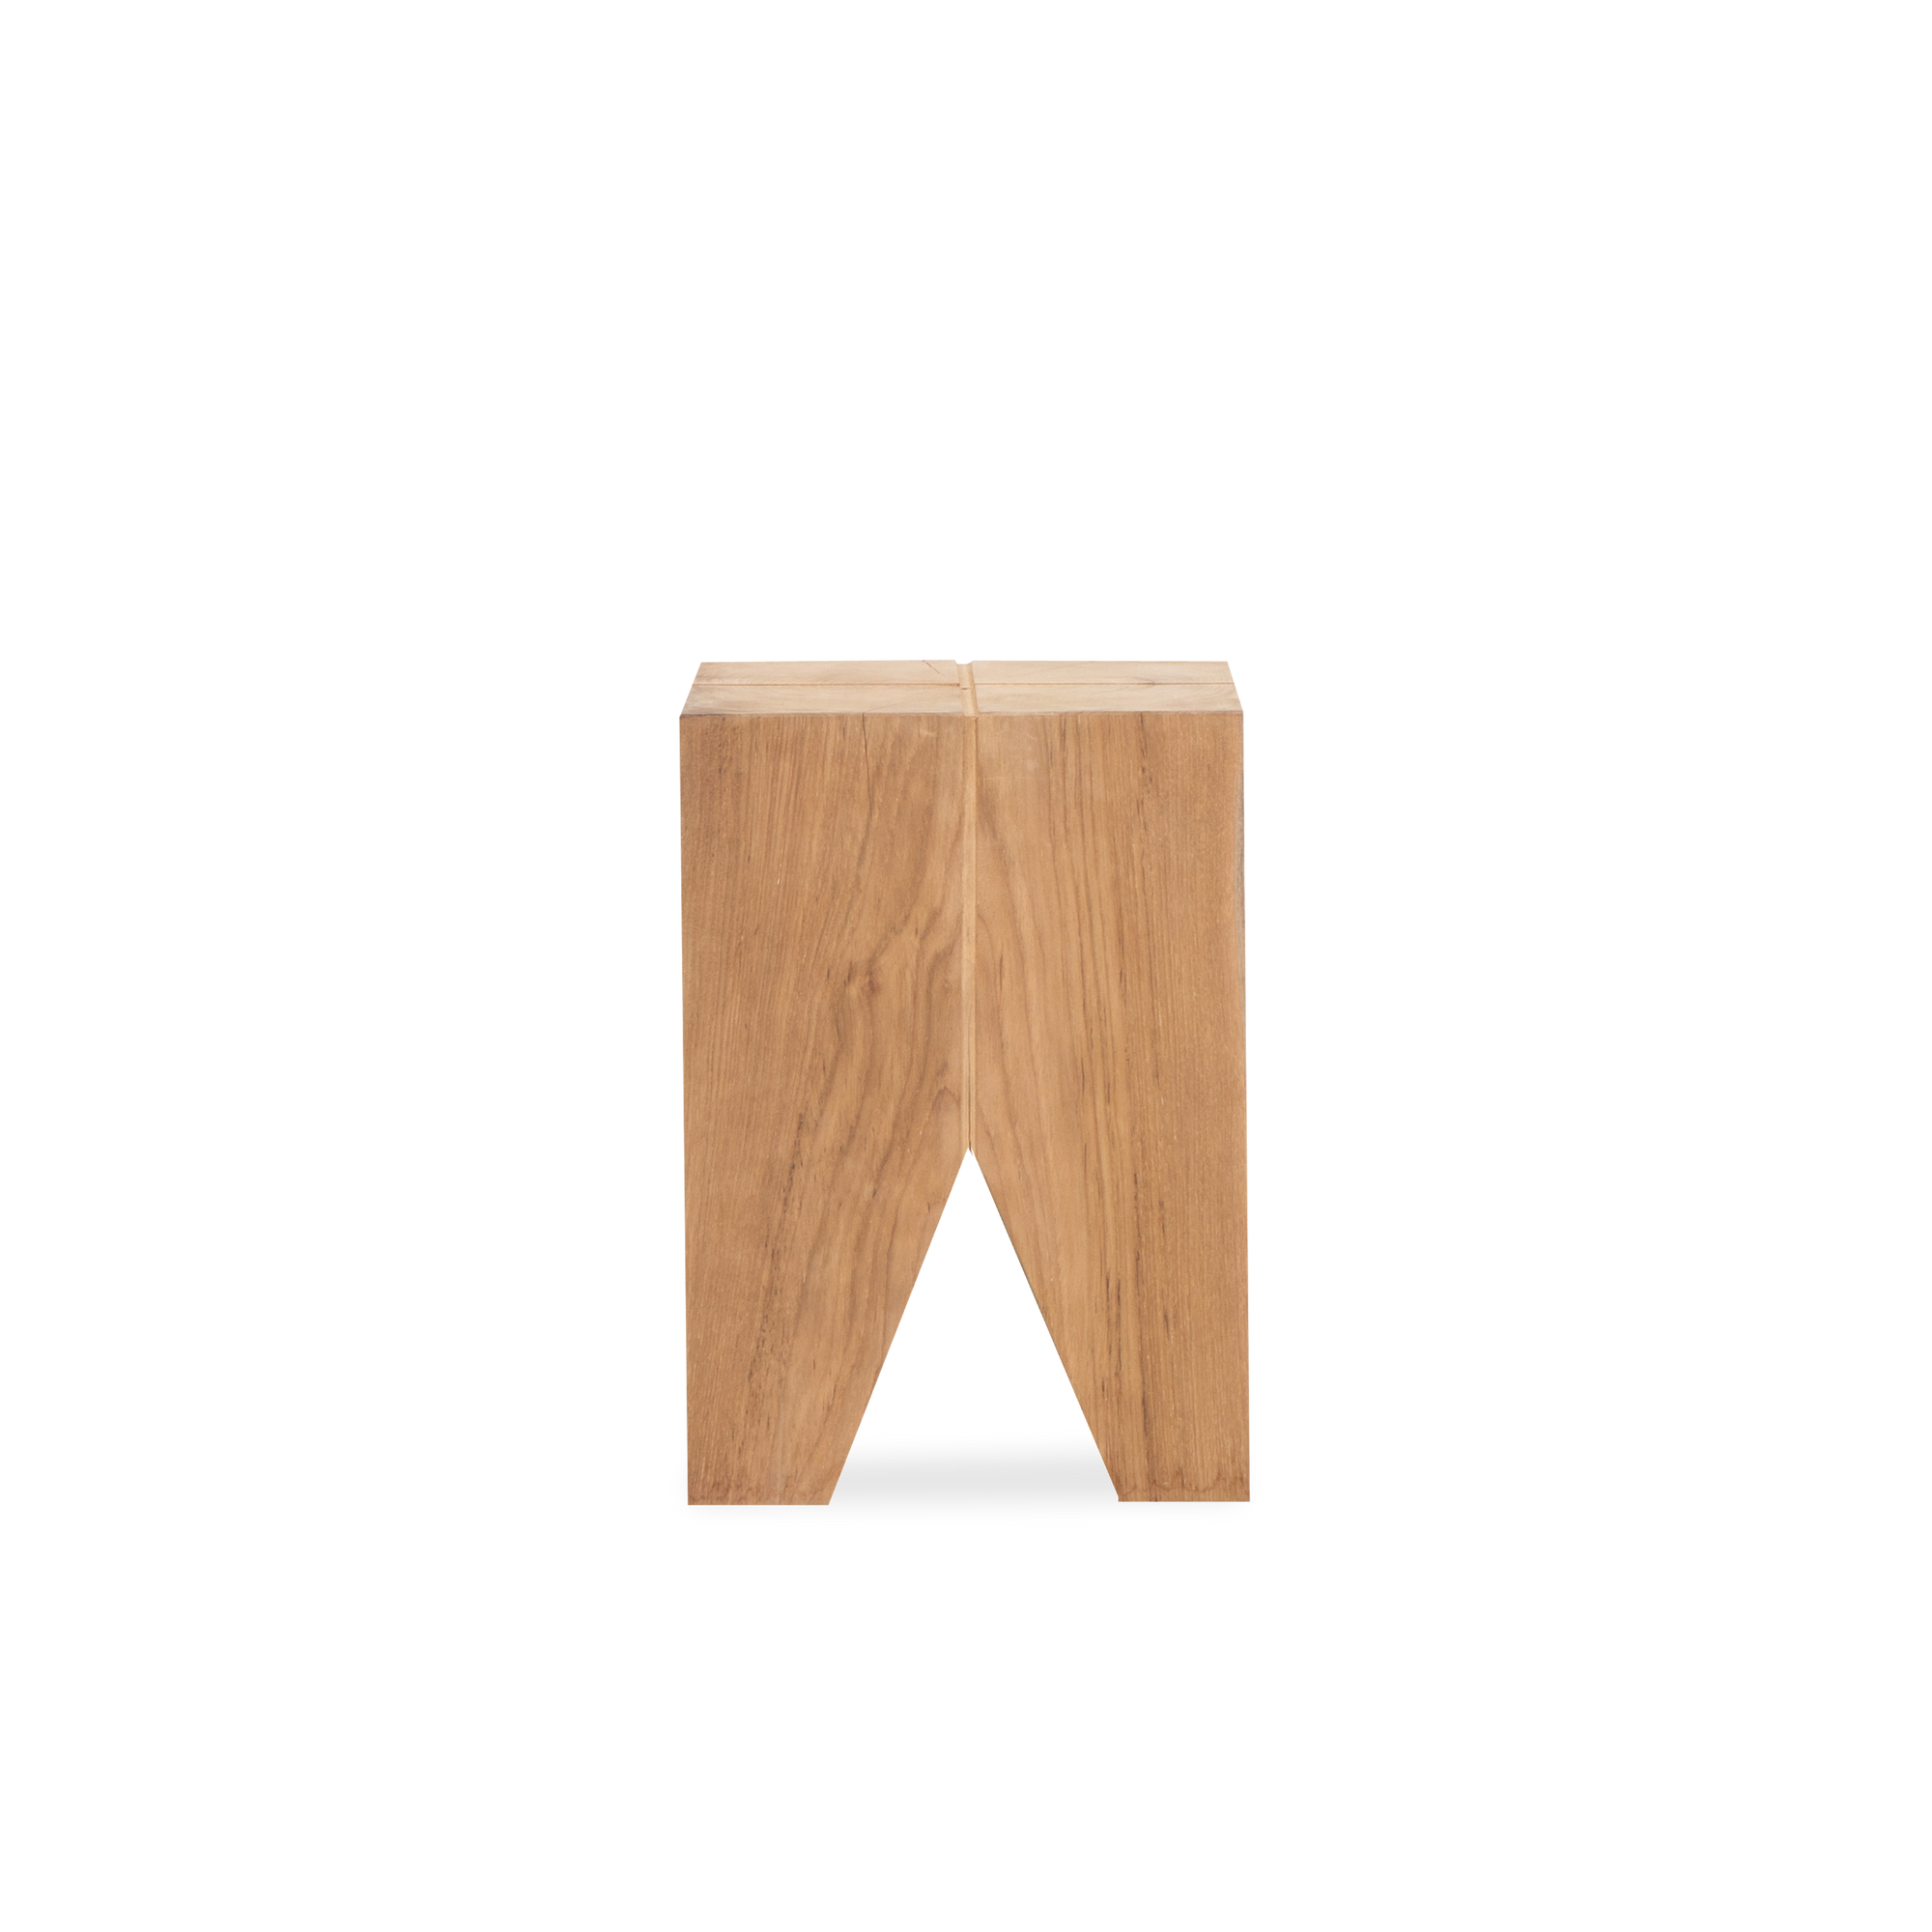 Interpreting natural roots, stumps and live edges as an everyday lifestyle piece, the Pure Triangle Side Table focuses on teak as its primary material.